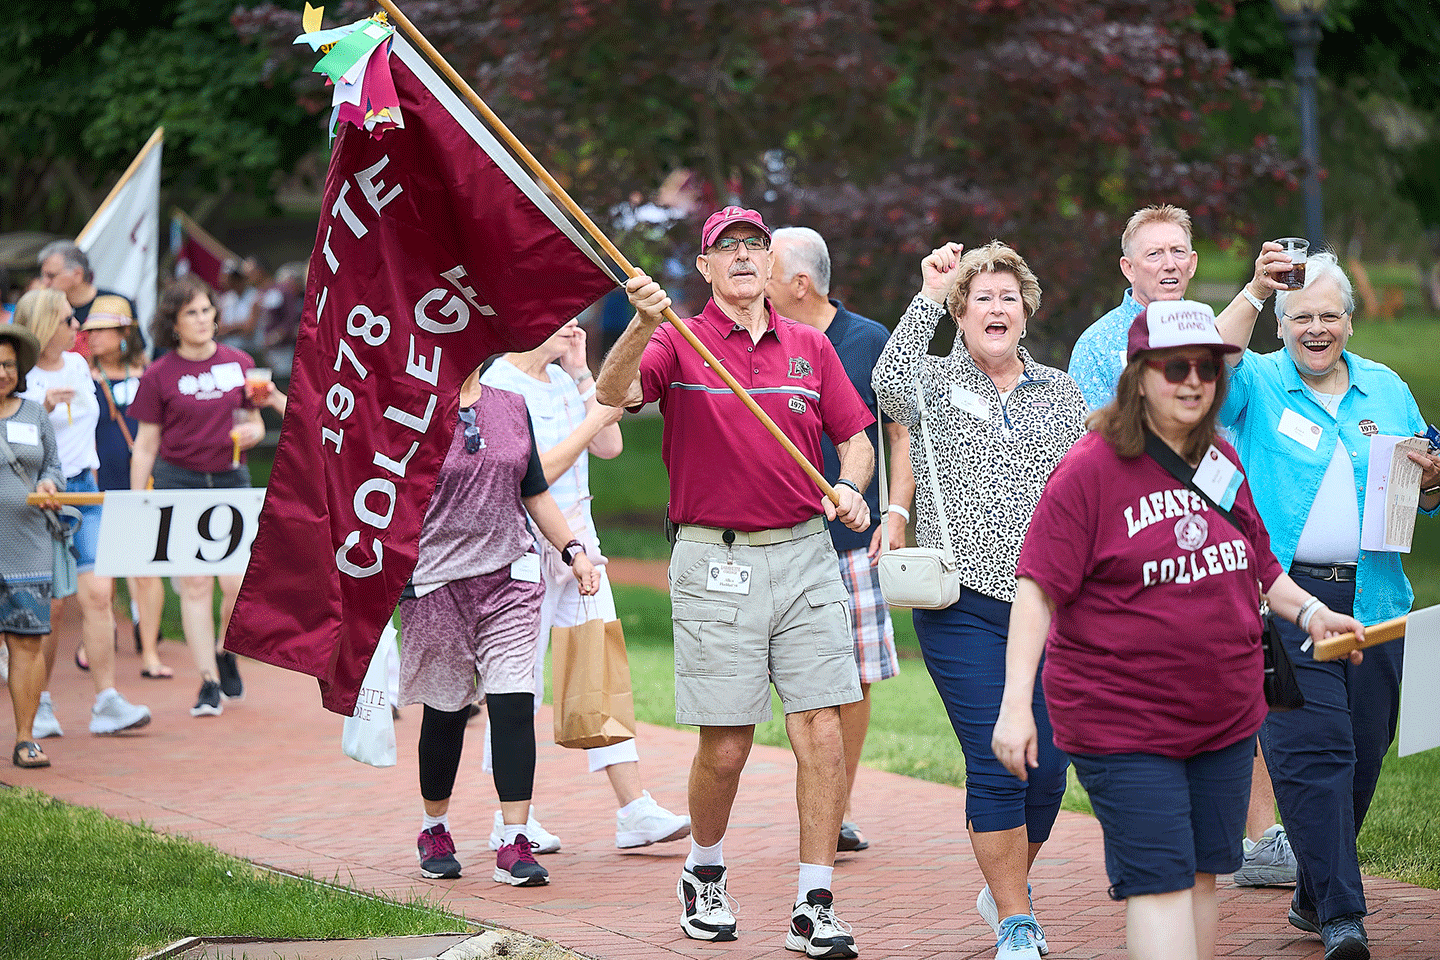 Members of the Class of 1978 walk in the parade.